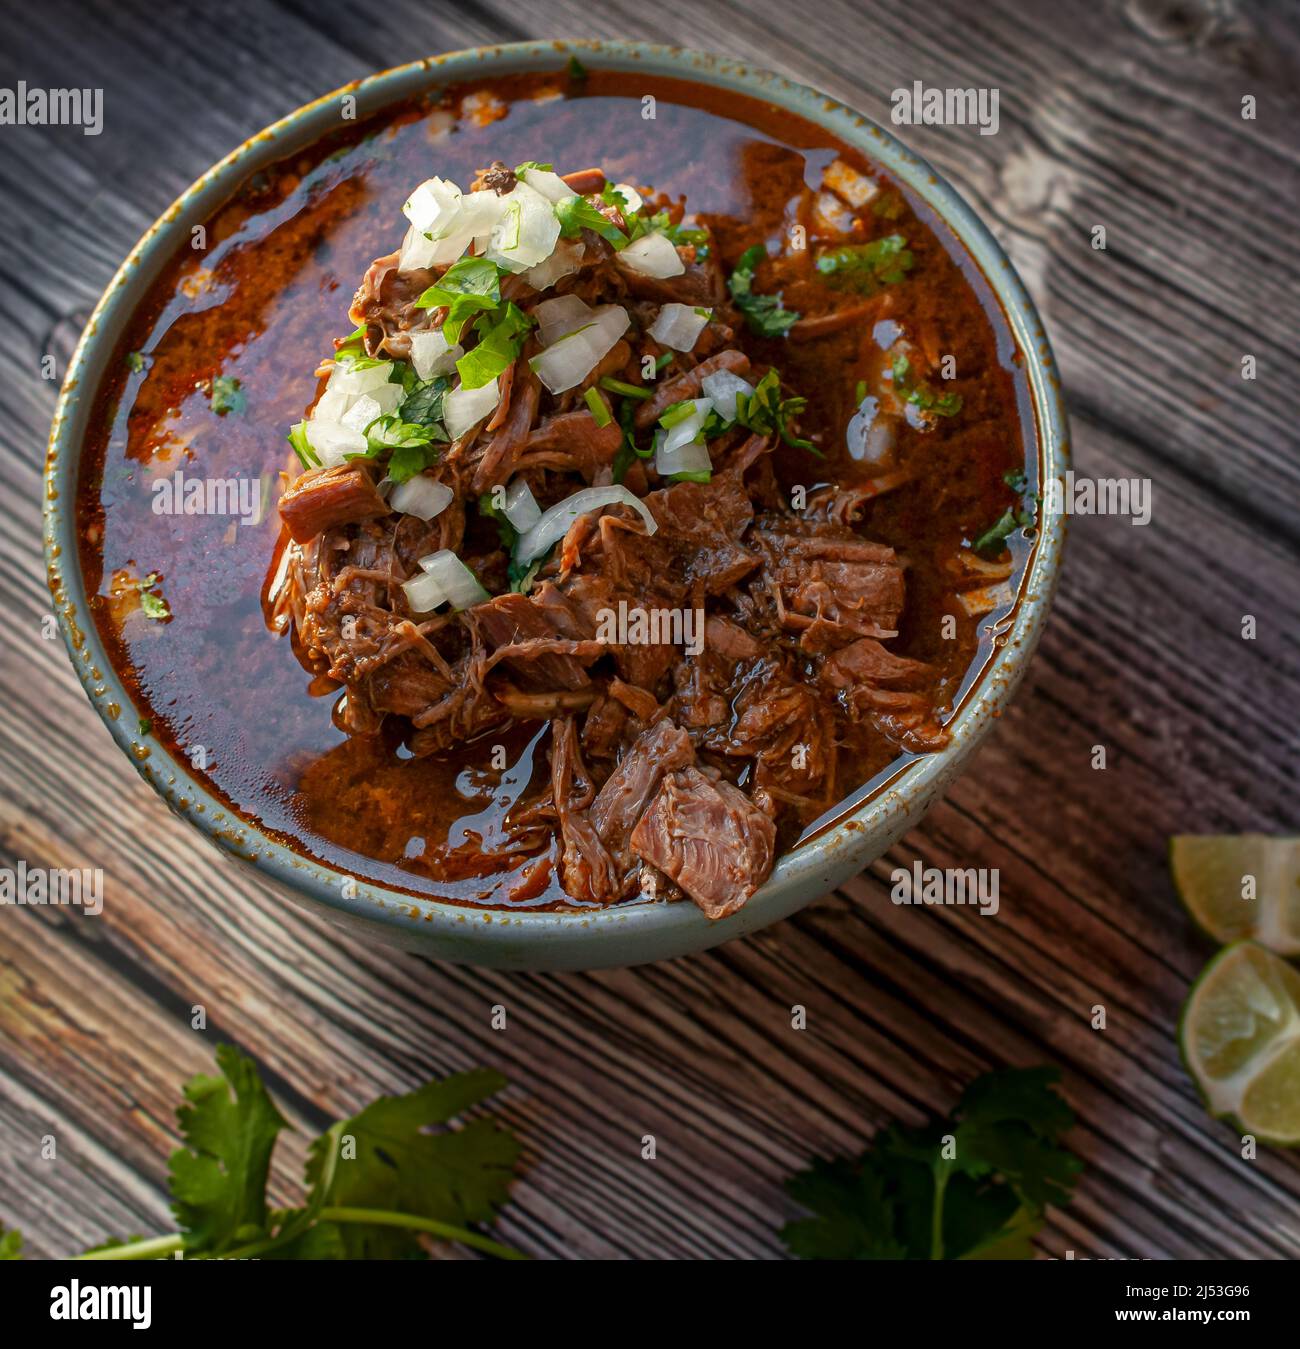 A bowl of BIRRIA or BARBACOA, a traditional Mexican dish with lemons and  cilantro on the side over a wooden table Stock Photo - Alamy